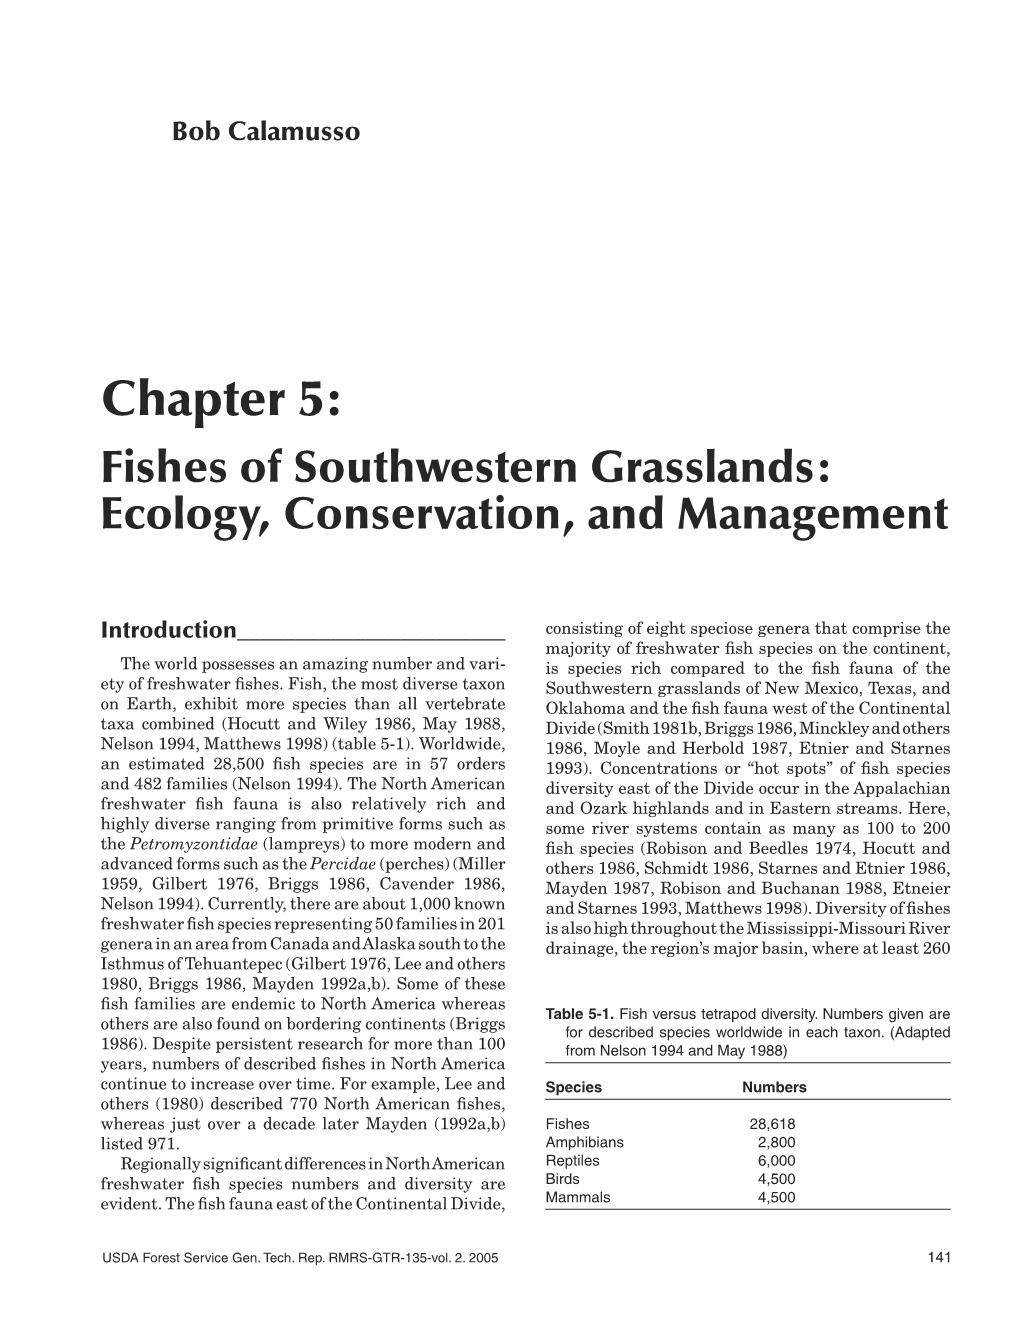 Chapter 5: Fishes of Southwestern Grasslands: Ecology, Conservation, and Management